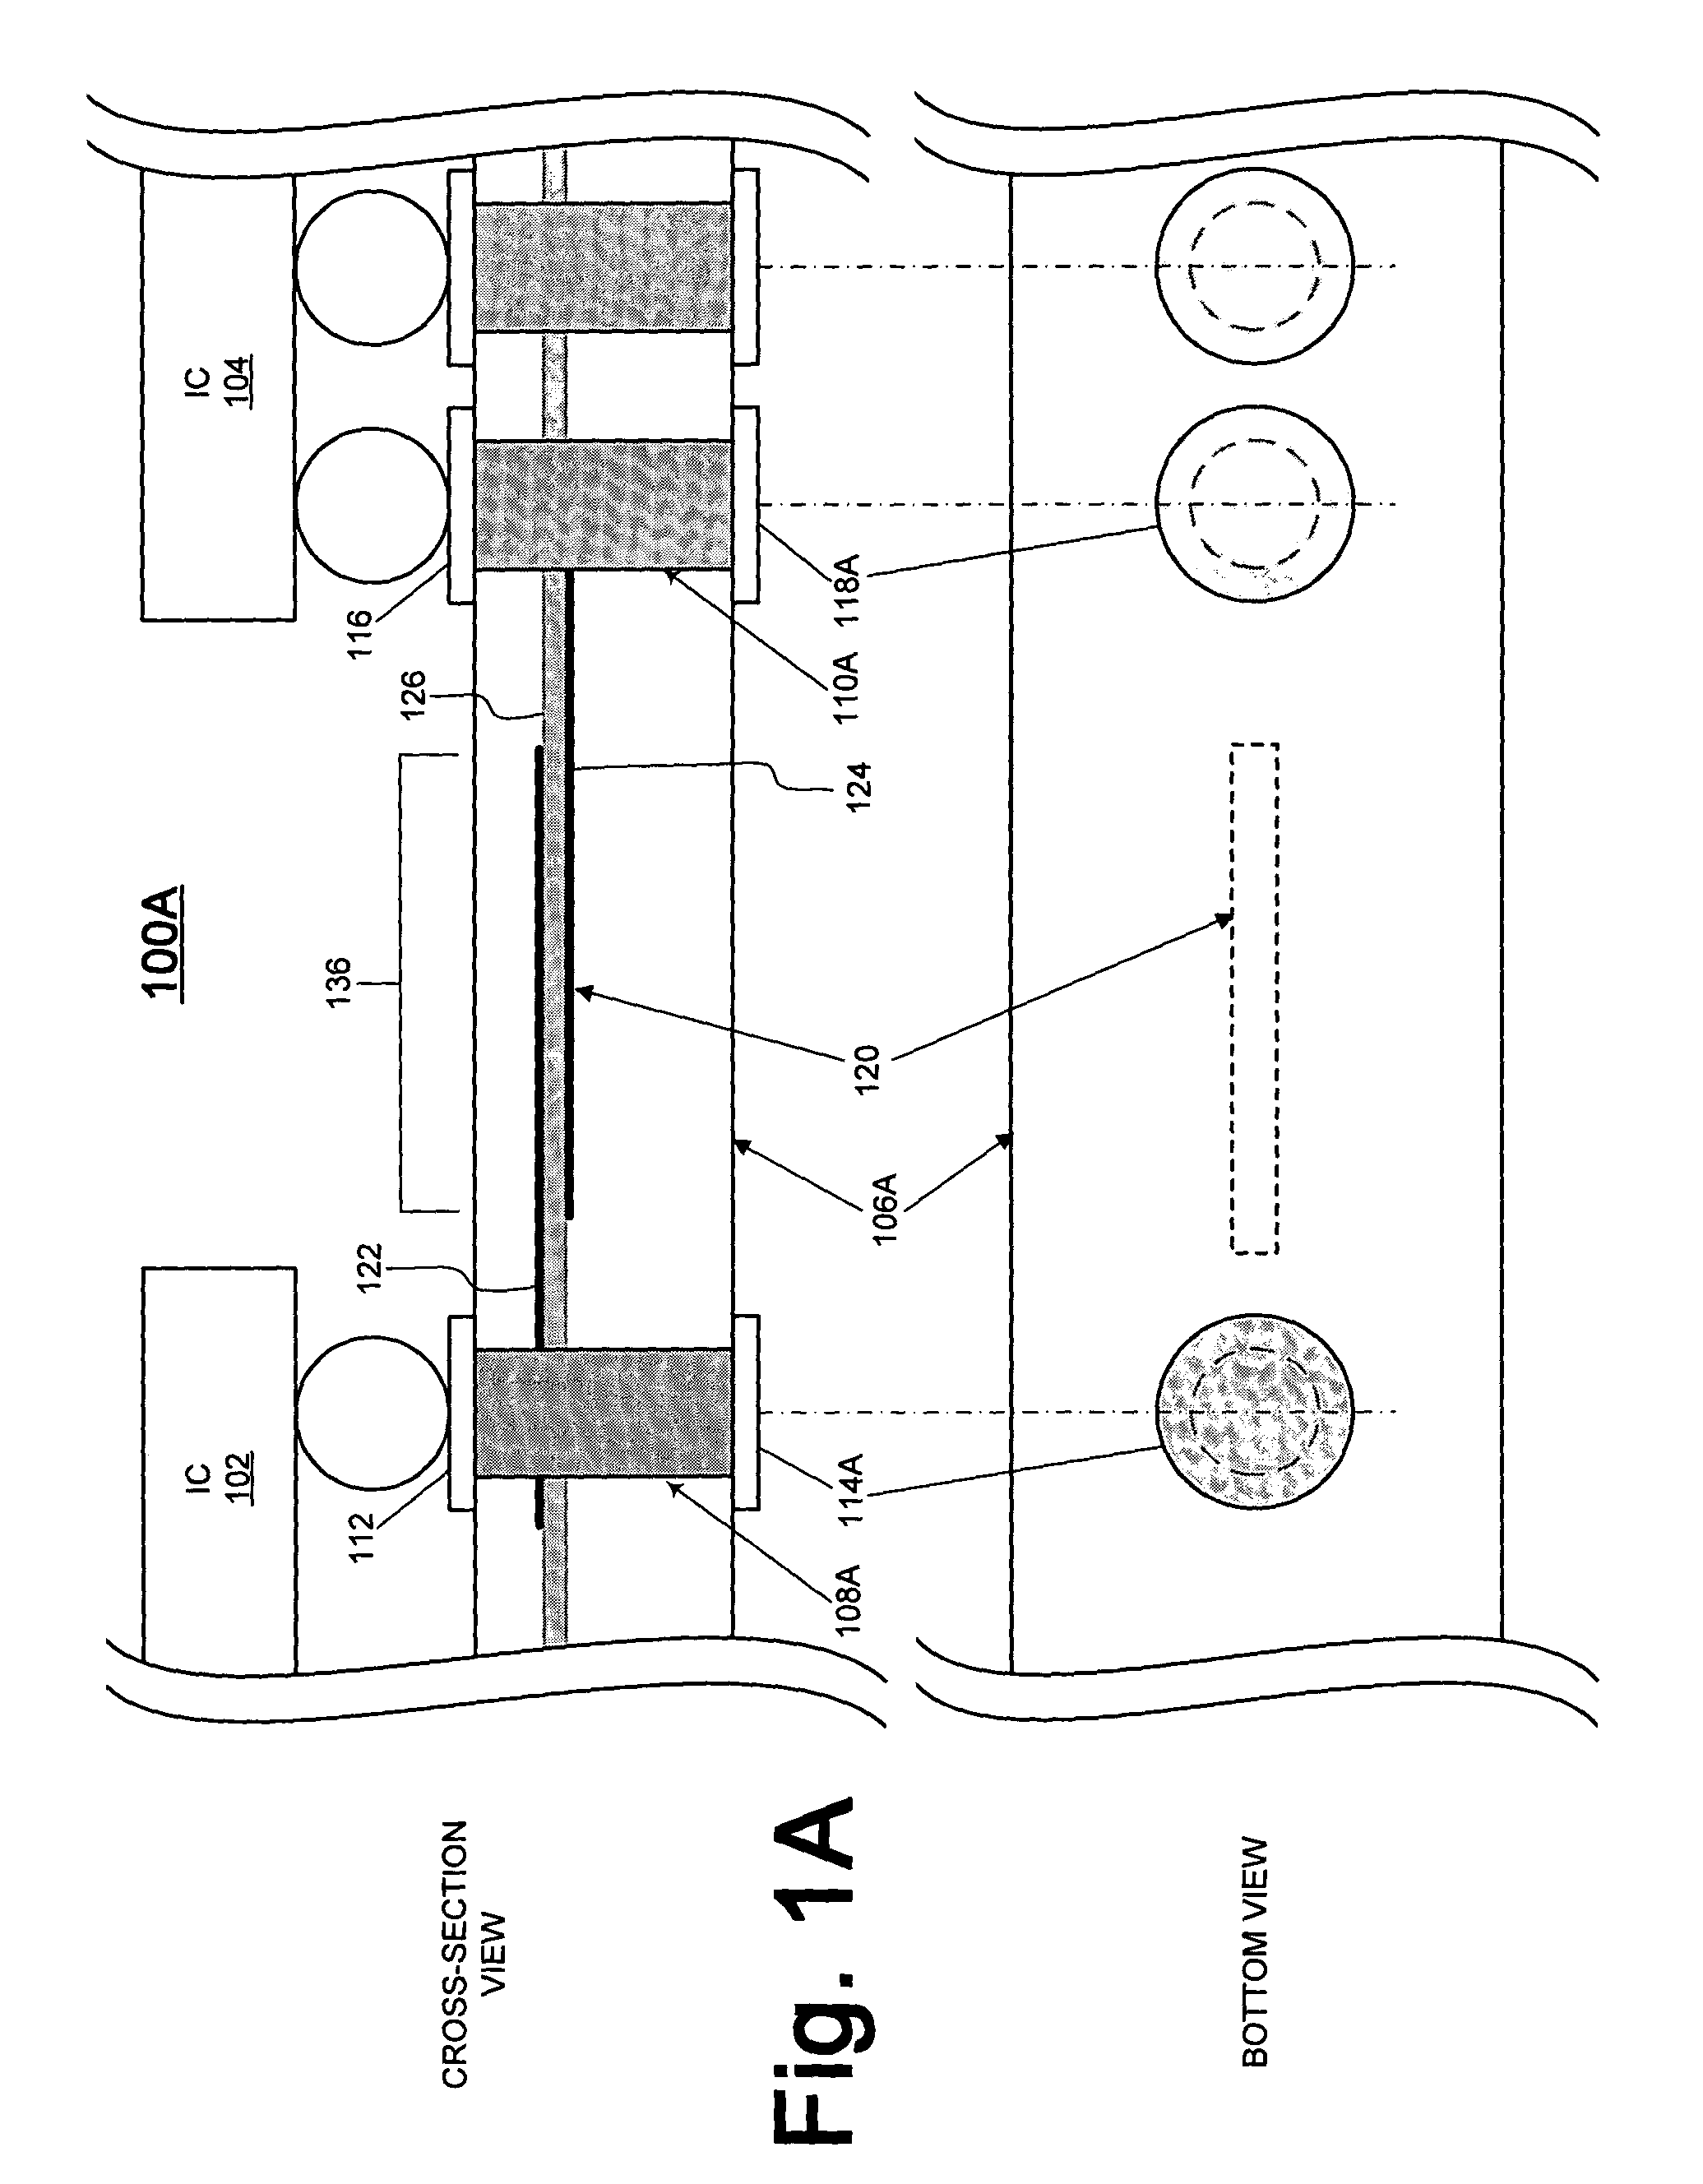 Method for tuning an embedded capacitor in a multilayer circuit board